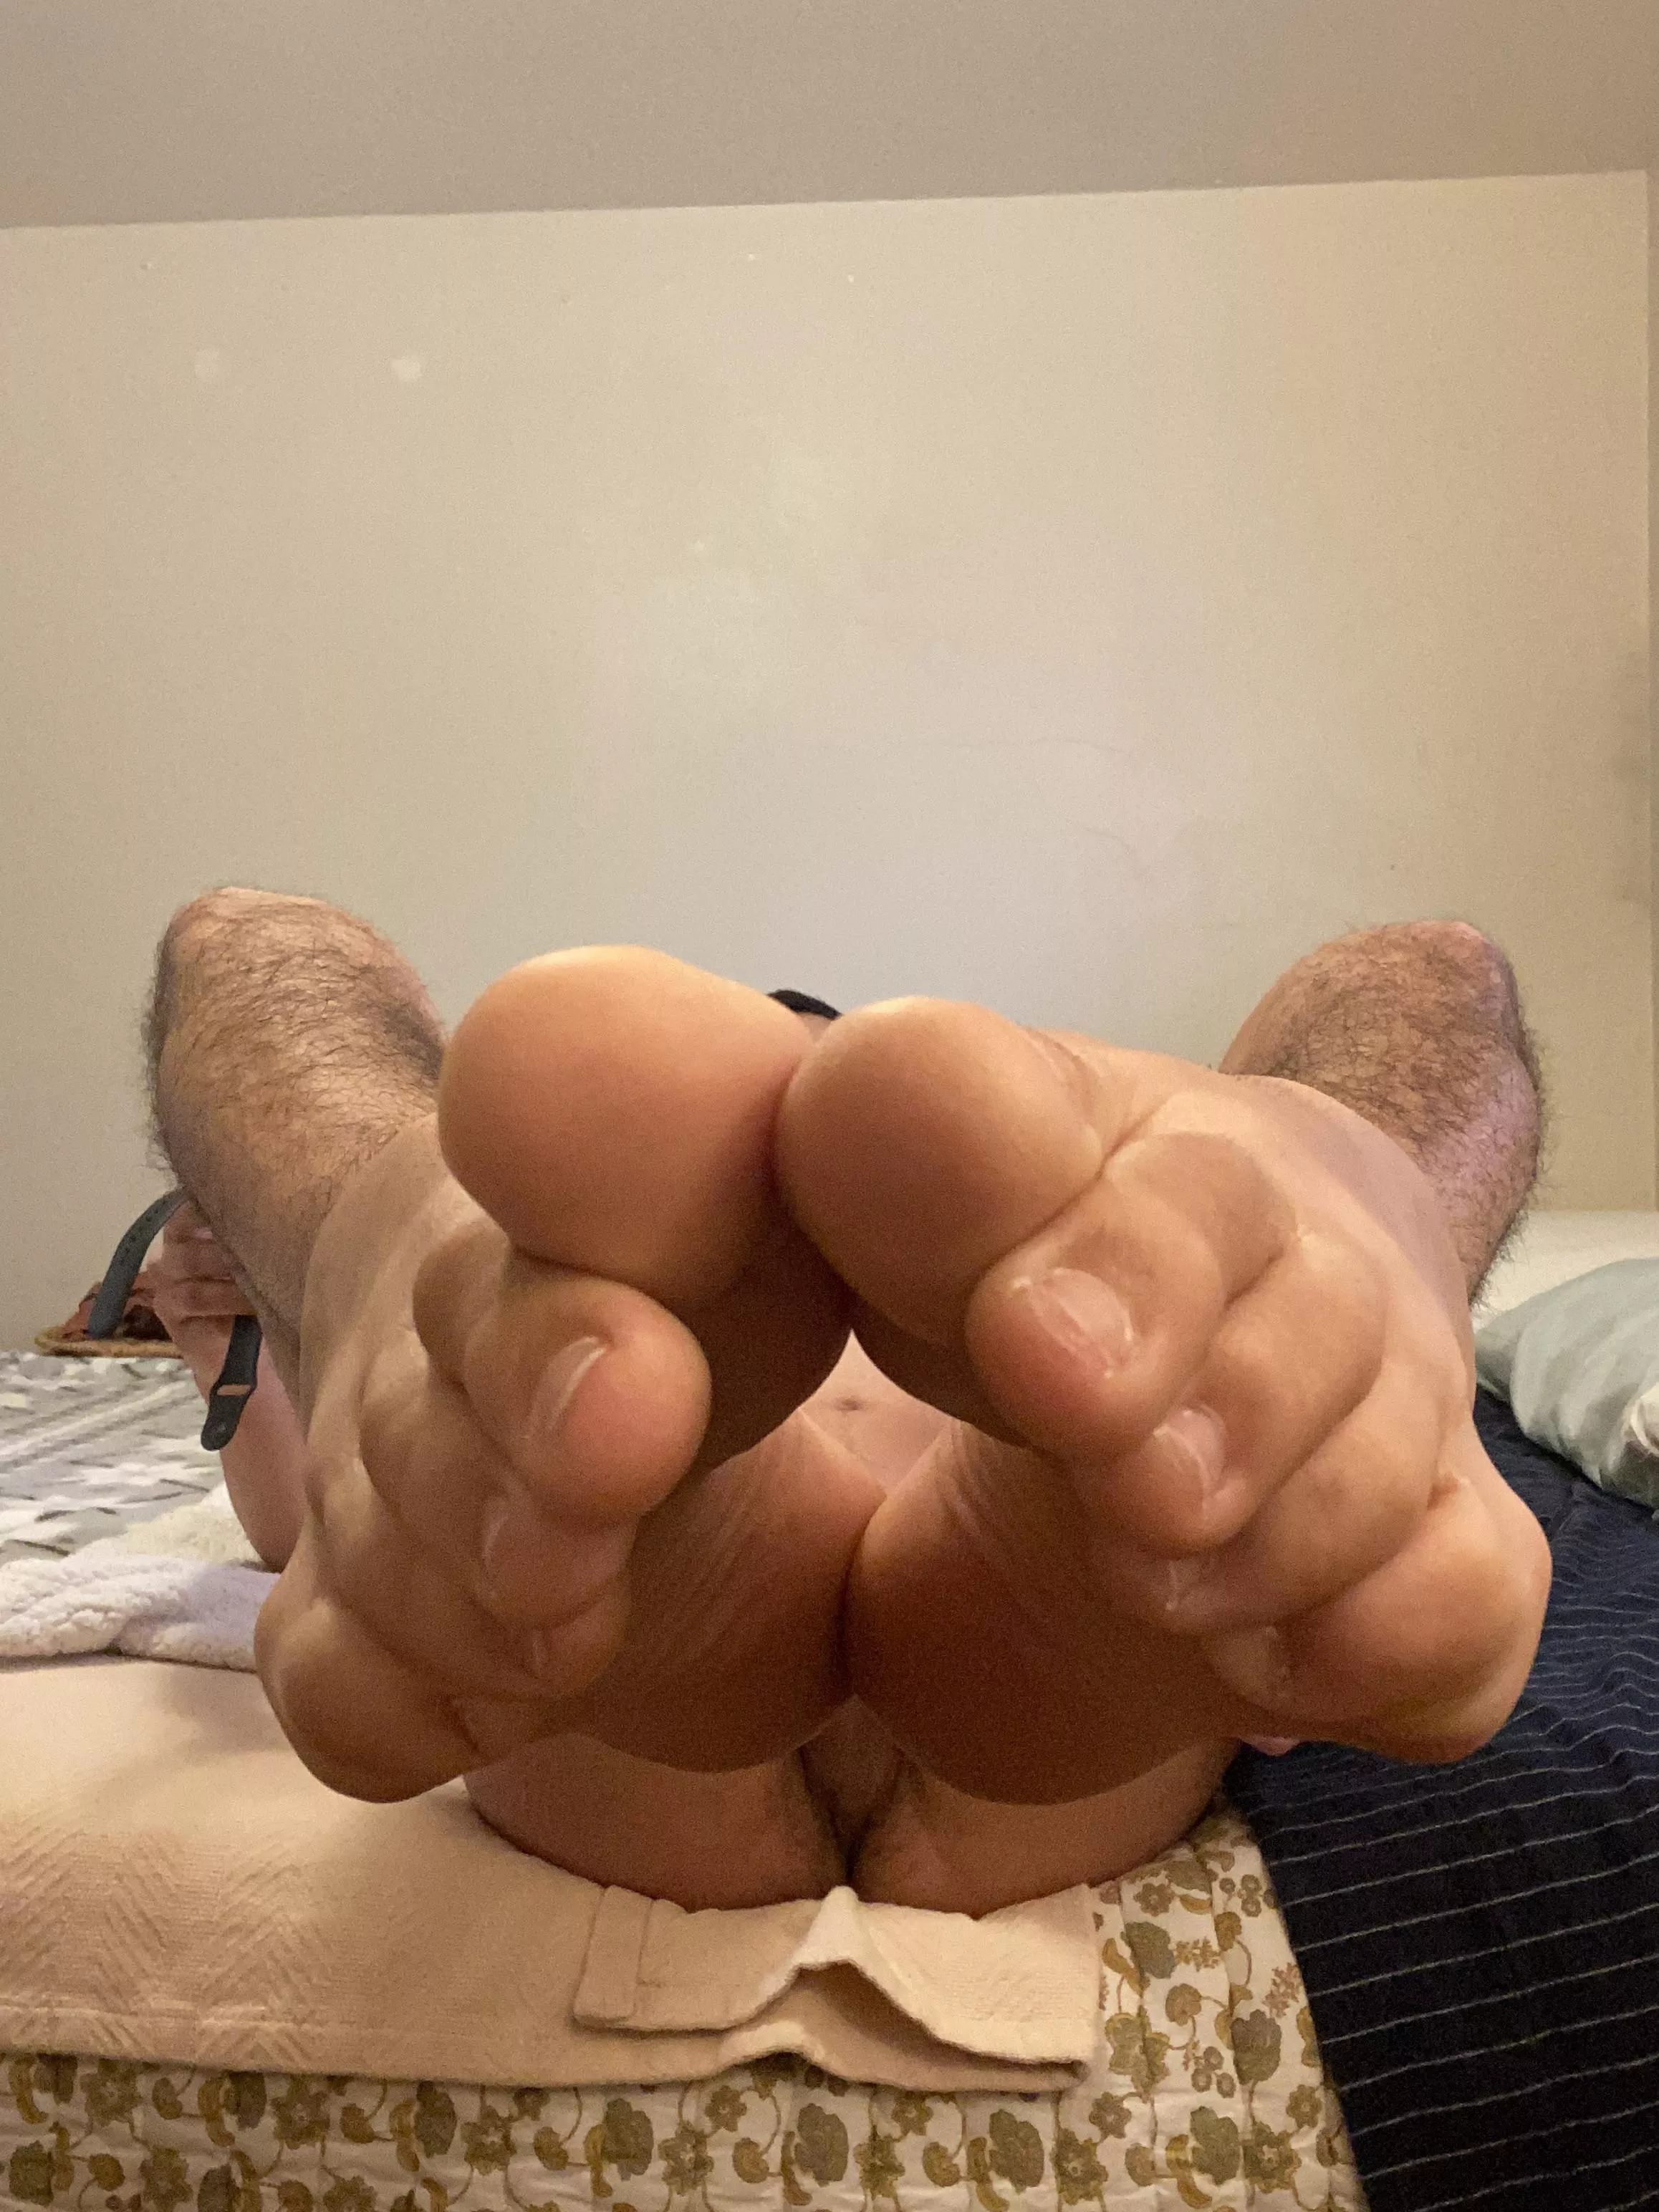 Suck My Toes Pov - POV you begged to suck on my toes, and now I'm going to let you ðŸ˜˜ nudes |  Watch-porn.net